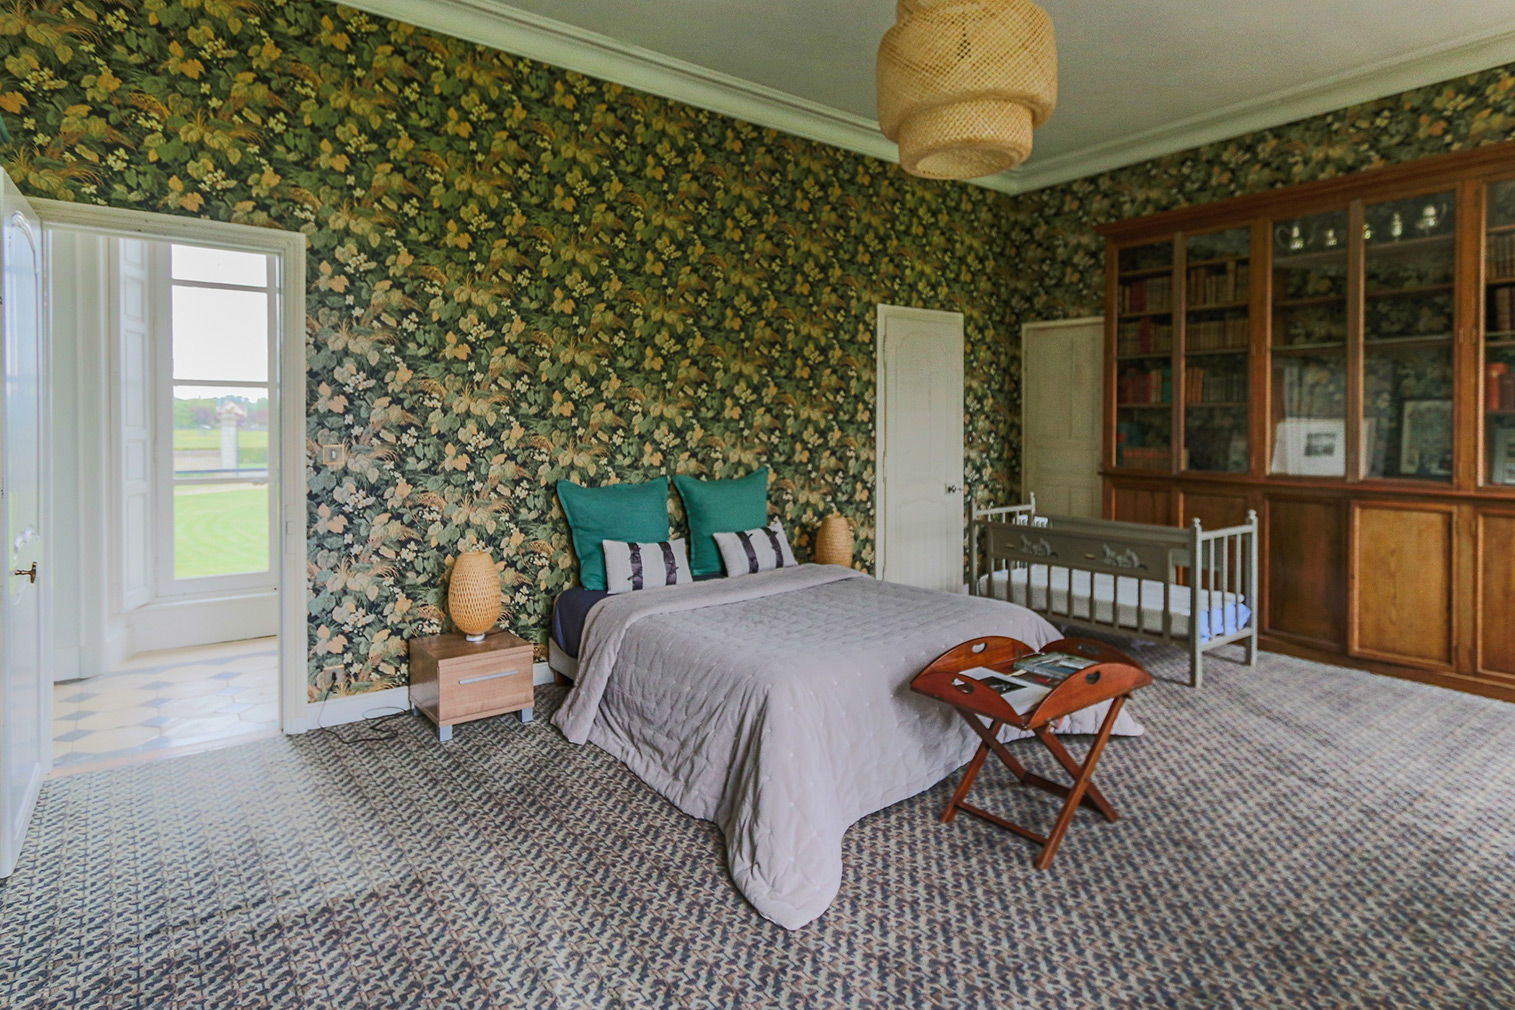 Peek inside the colourful interiors of this restored 18th-century chateau in Normandy